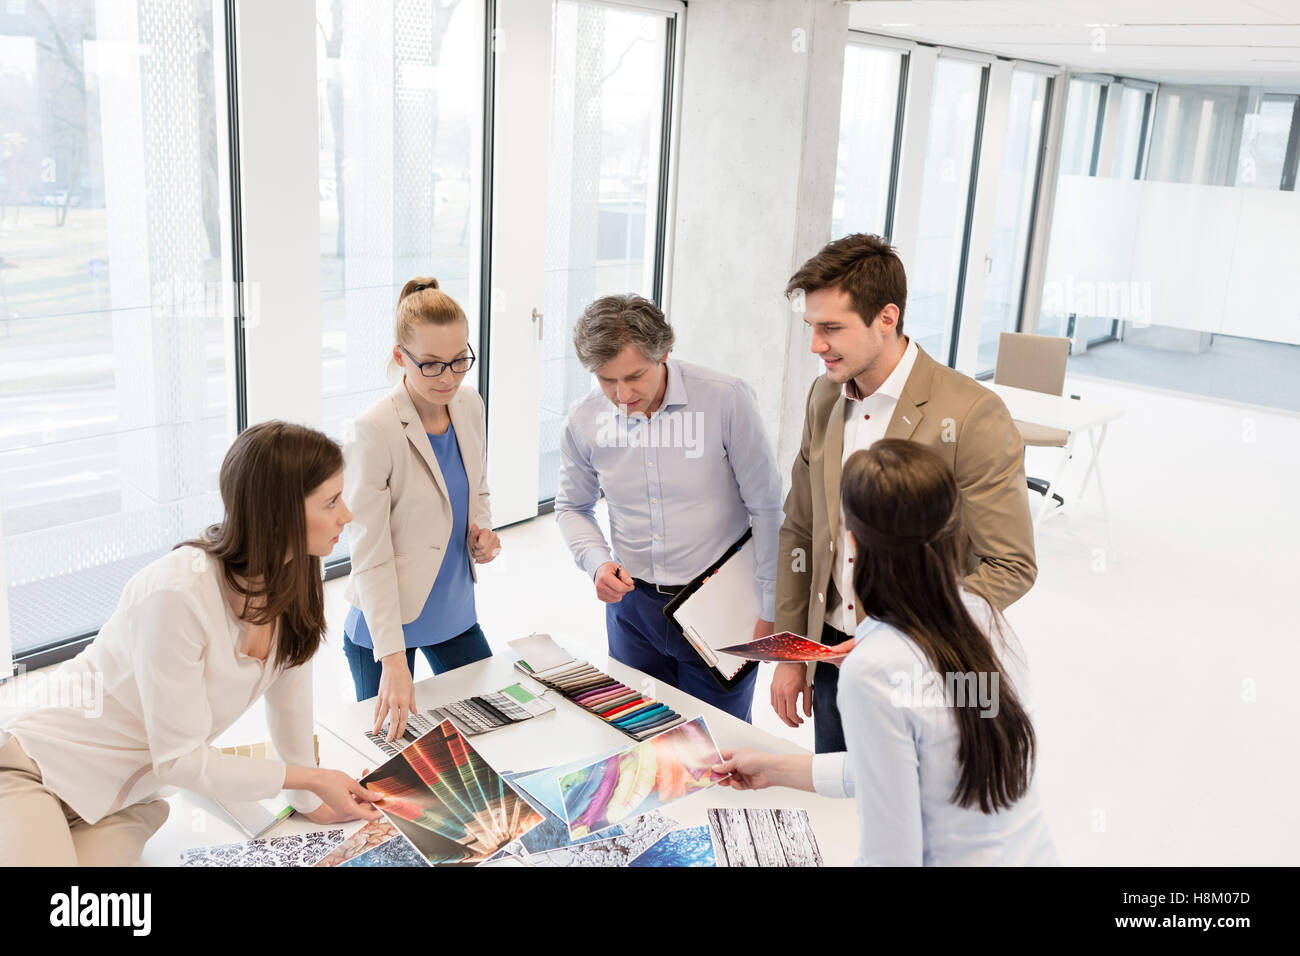 High angle view of design professionals having discussion at table in new office Stock Photo